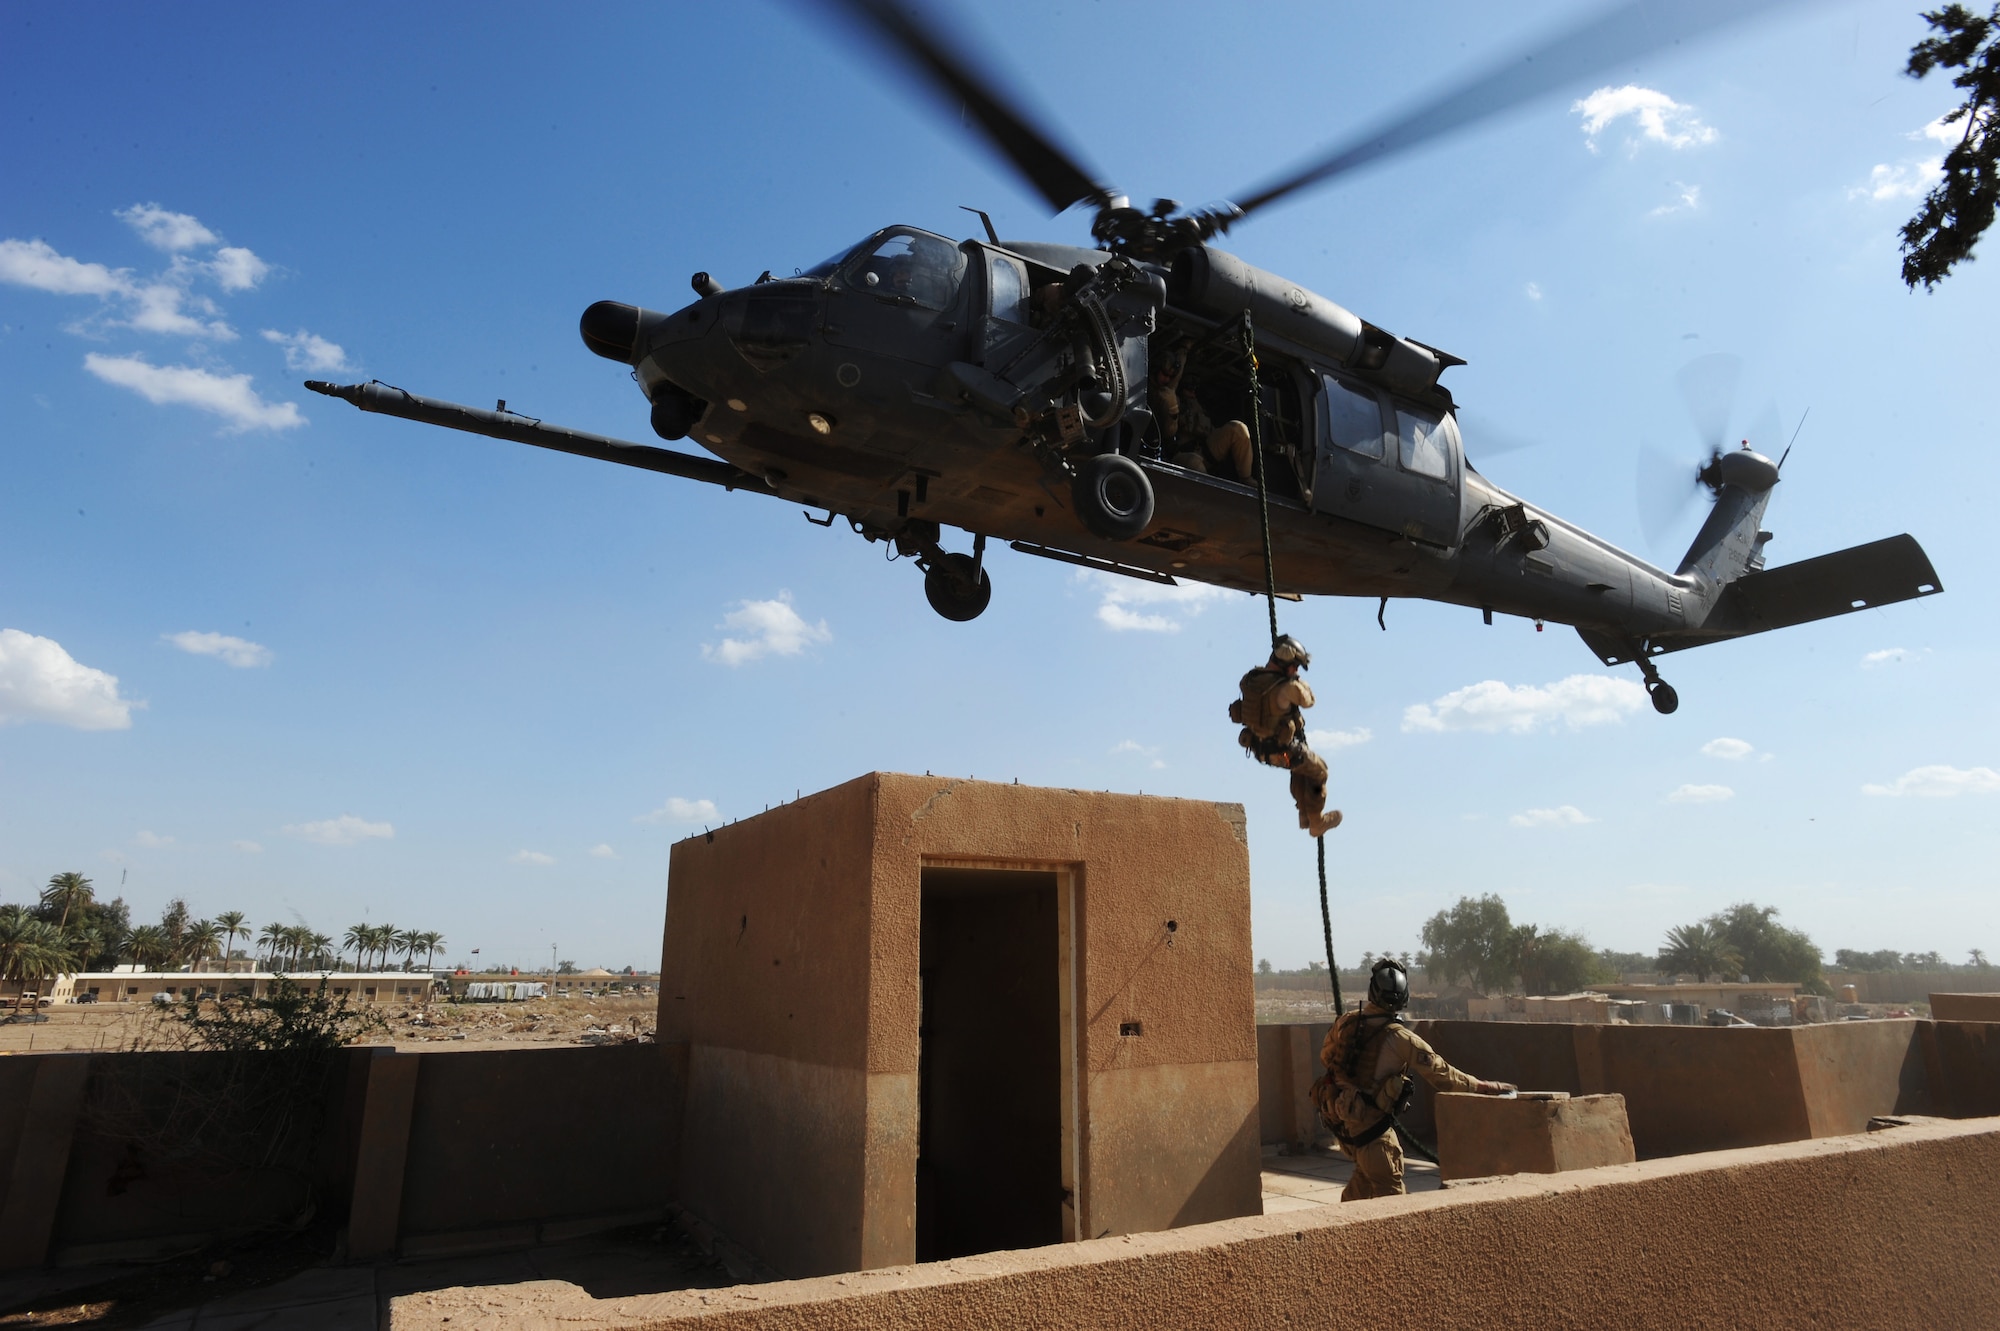 A U.S. Air Force Pararescuemen from the 64th Expeditionary Rescue Squadron, Joint Base Balad, Iraq, fast ropes from an HH-60 Pavehawk helicopter during a proficiency exercise outside of Baghdad, Iraq, April 10, 2009, in support of Operation Iraqi Freedom.  (U.S. Air Force photo by Staff Sgt. James L. Harper Jr.)